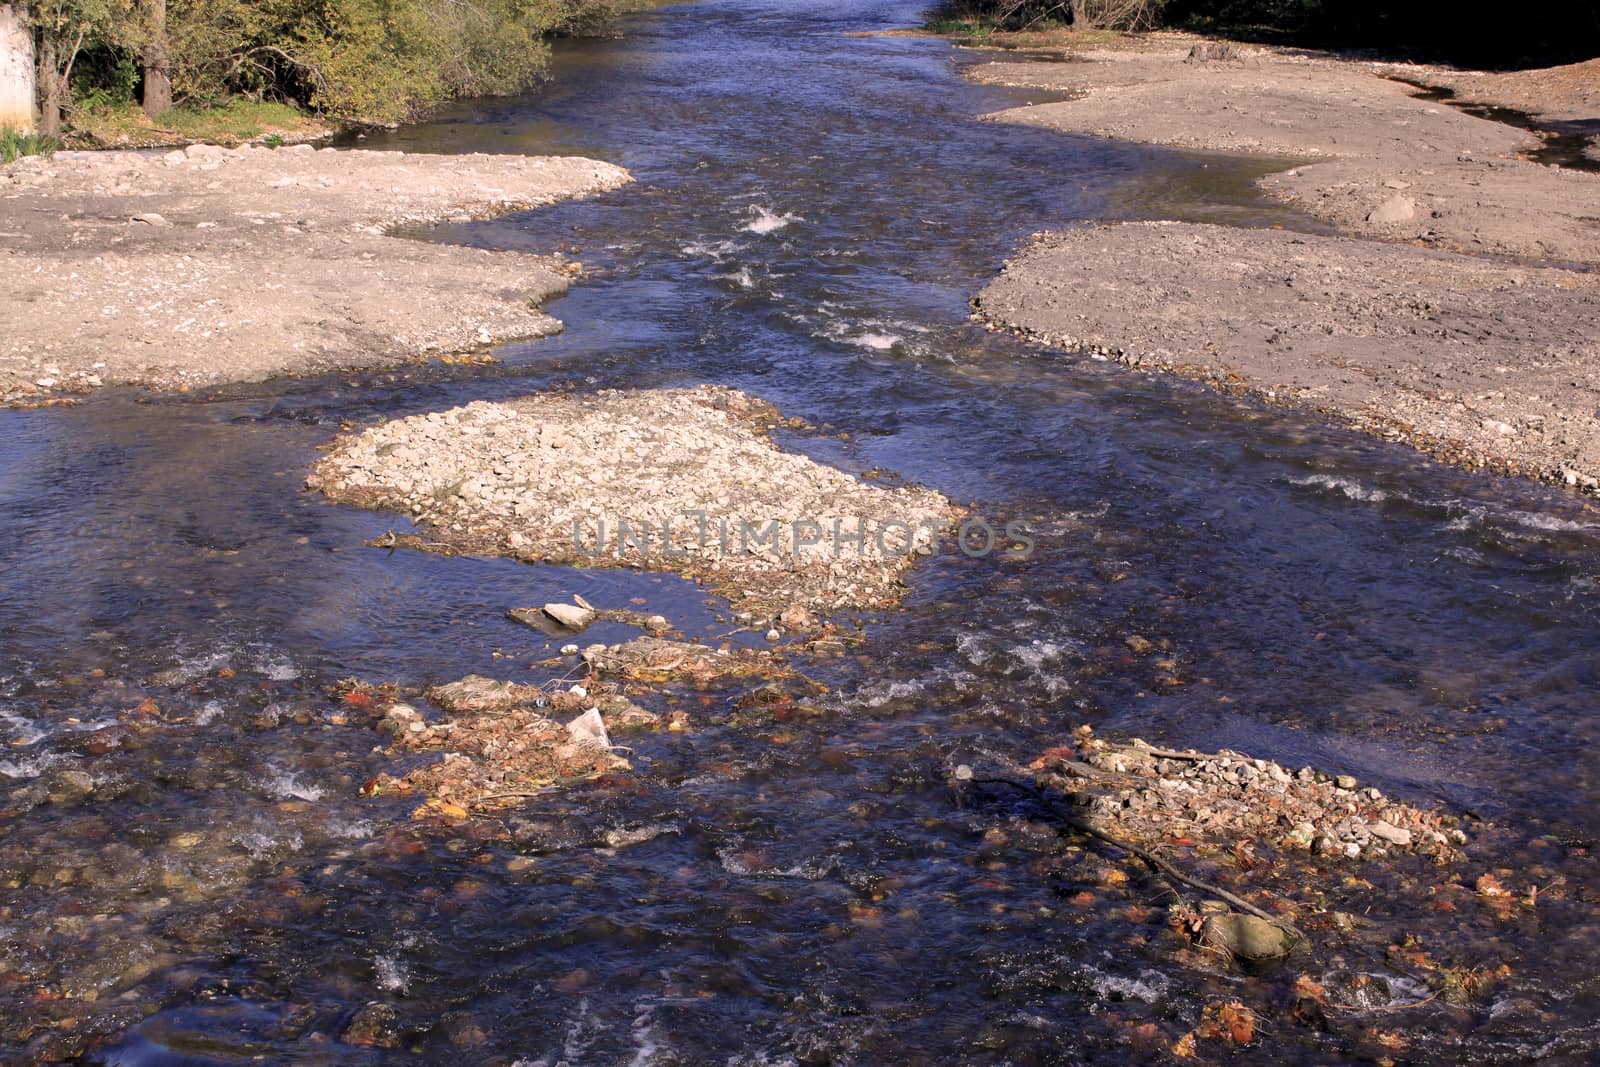 Natural ecological development of the banks of a river, stream or river